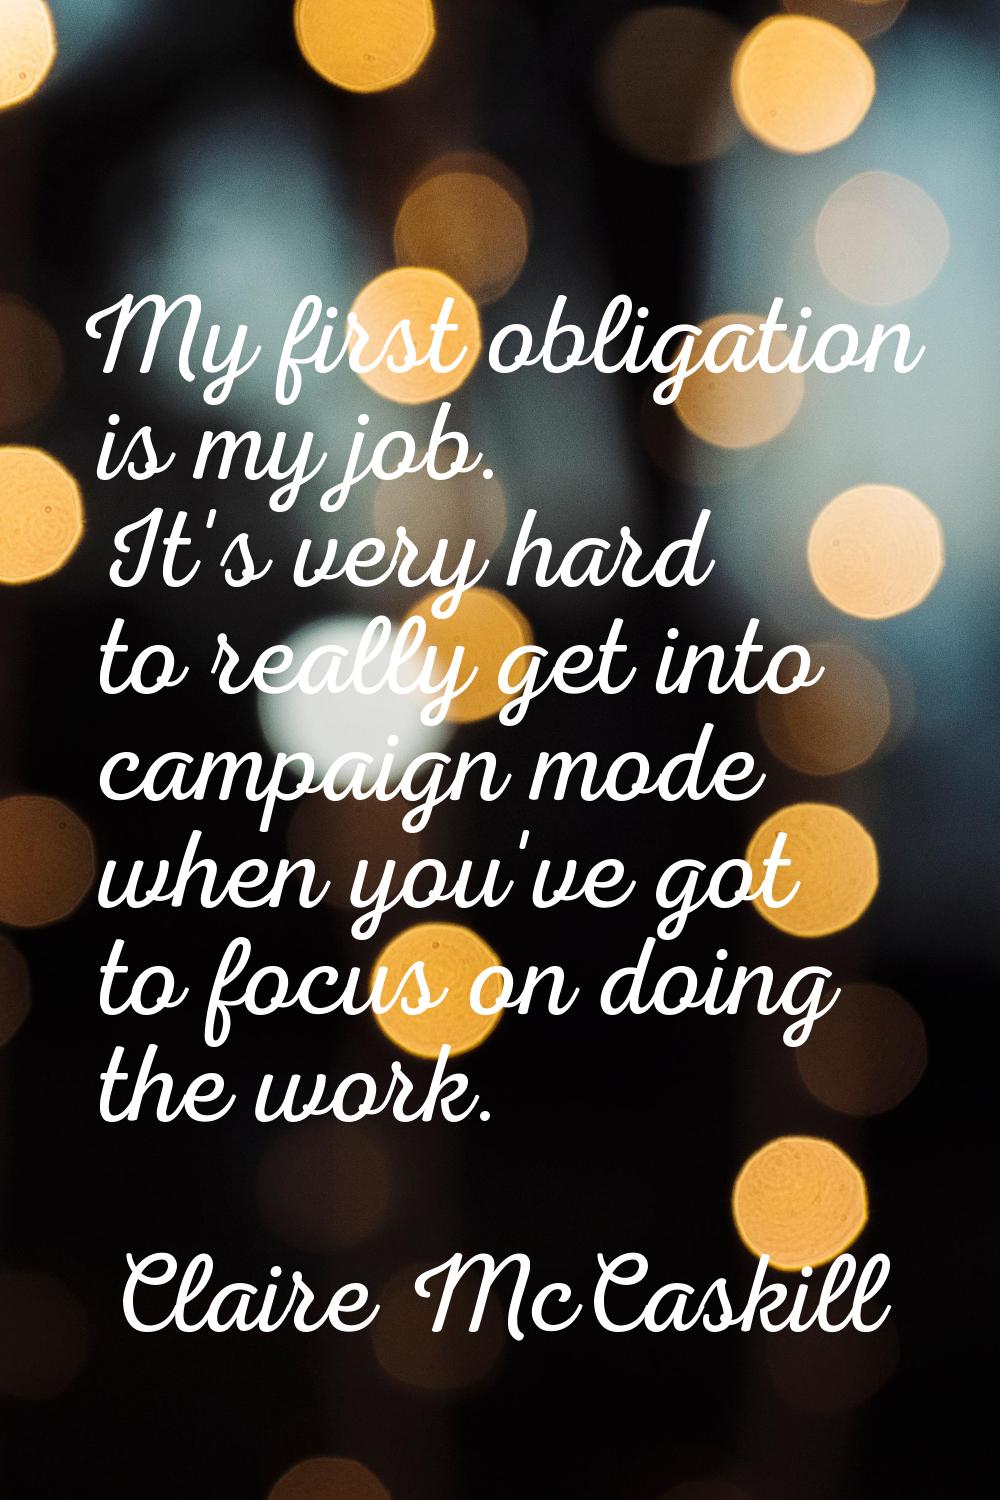 My first obligation is my job. It's very hard to really get into campaign mode when you've got to f